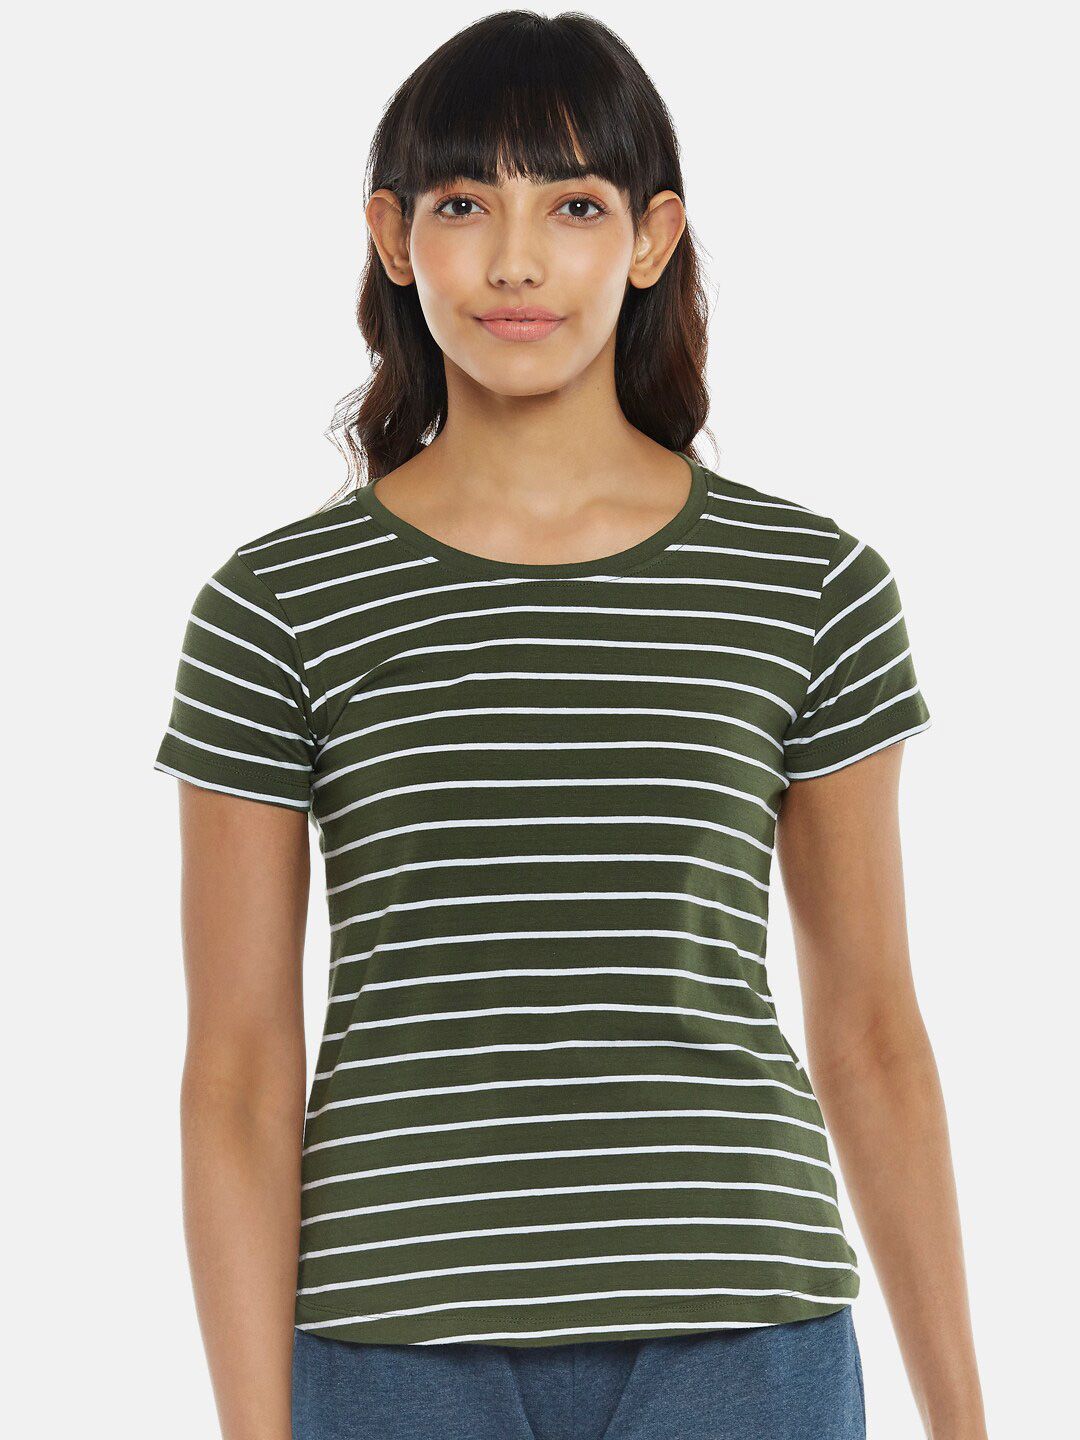 Dreamz by Pantaloons Women Olive Green Striped Pure Cotton Top Price in India